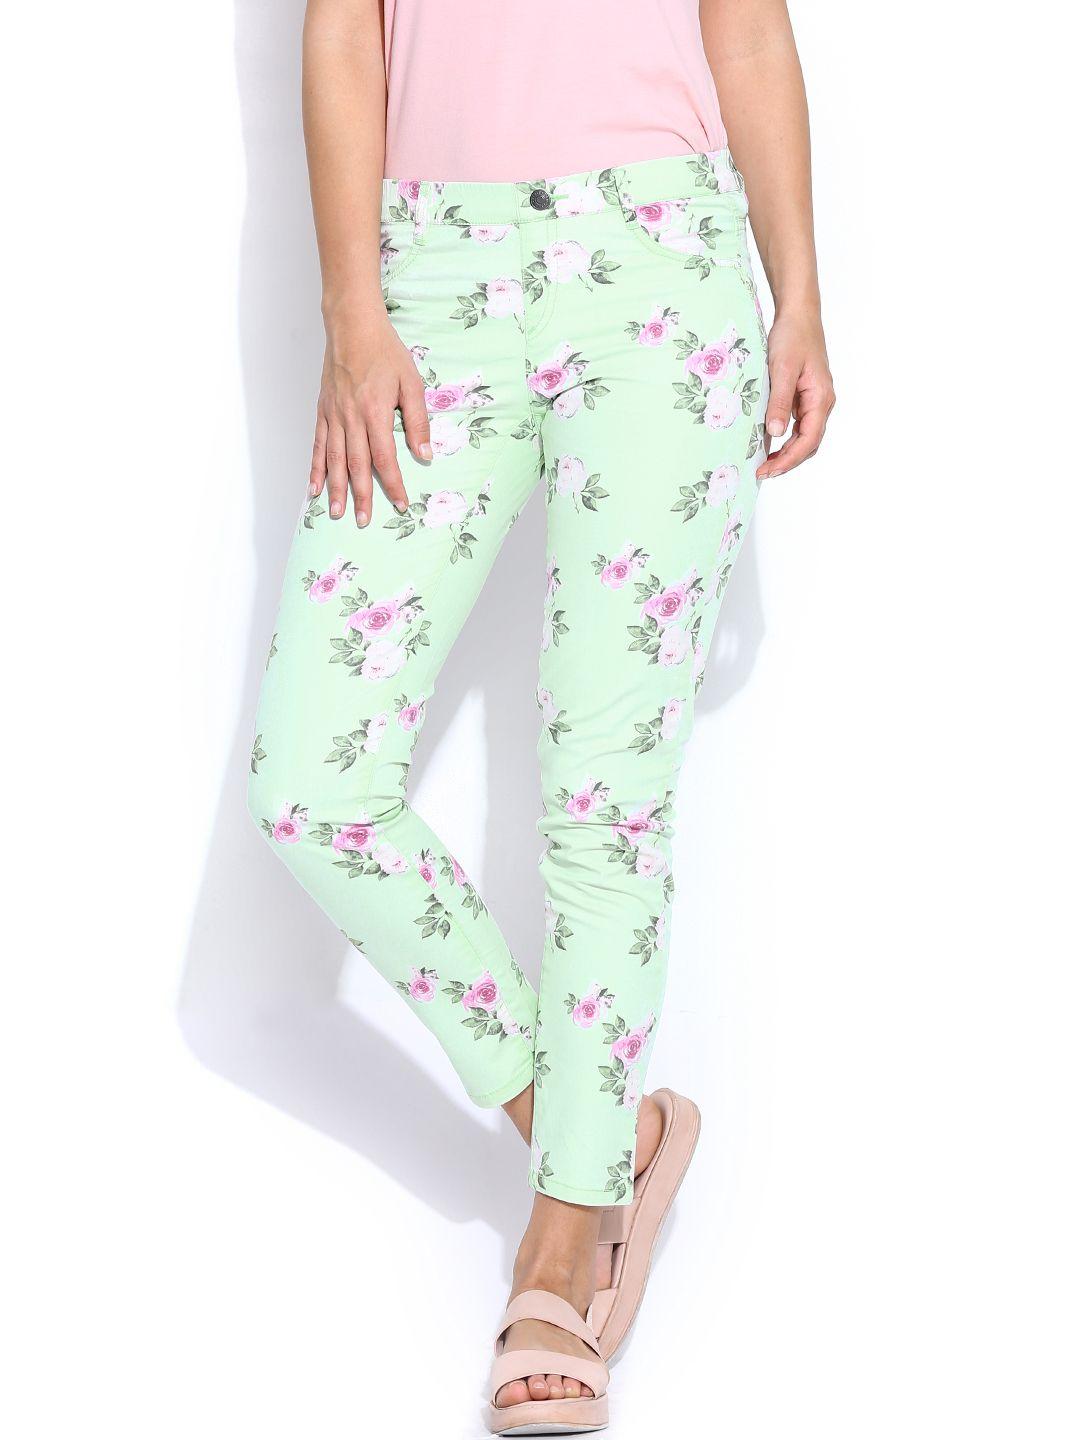 united colors of benetton women mint green floral printed slim fit jeggings